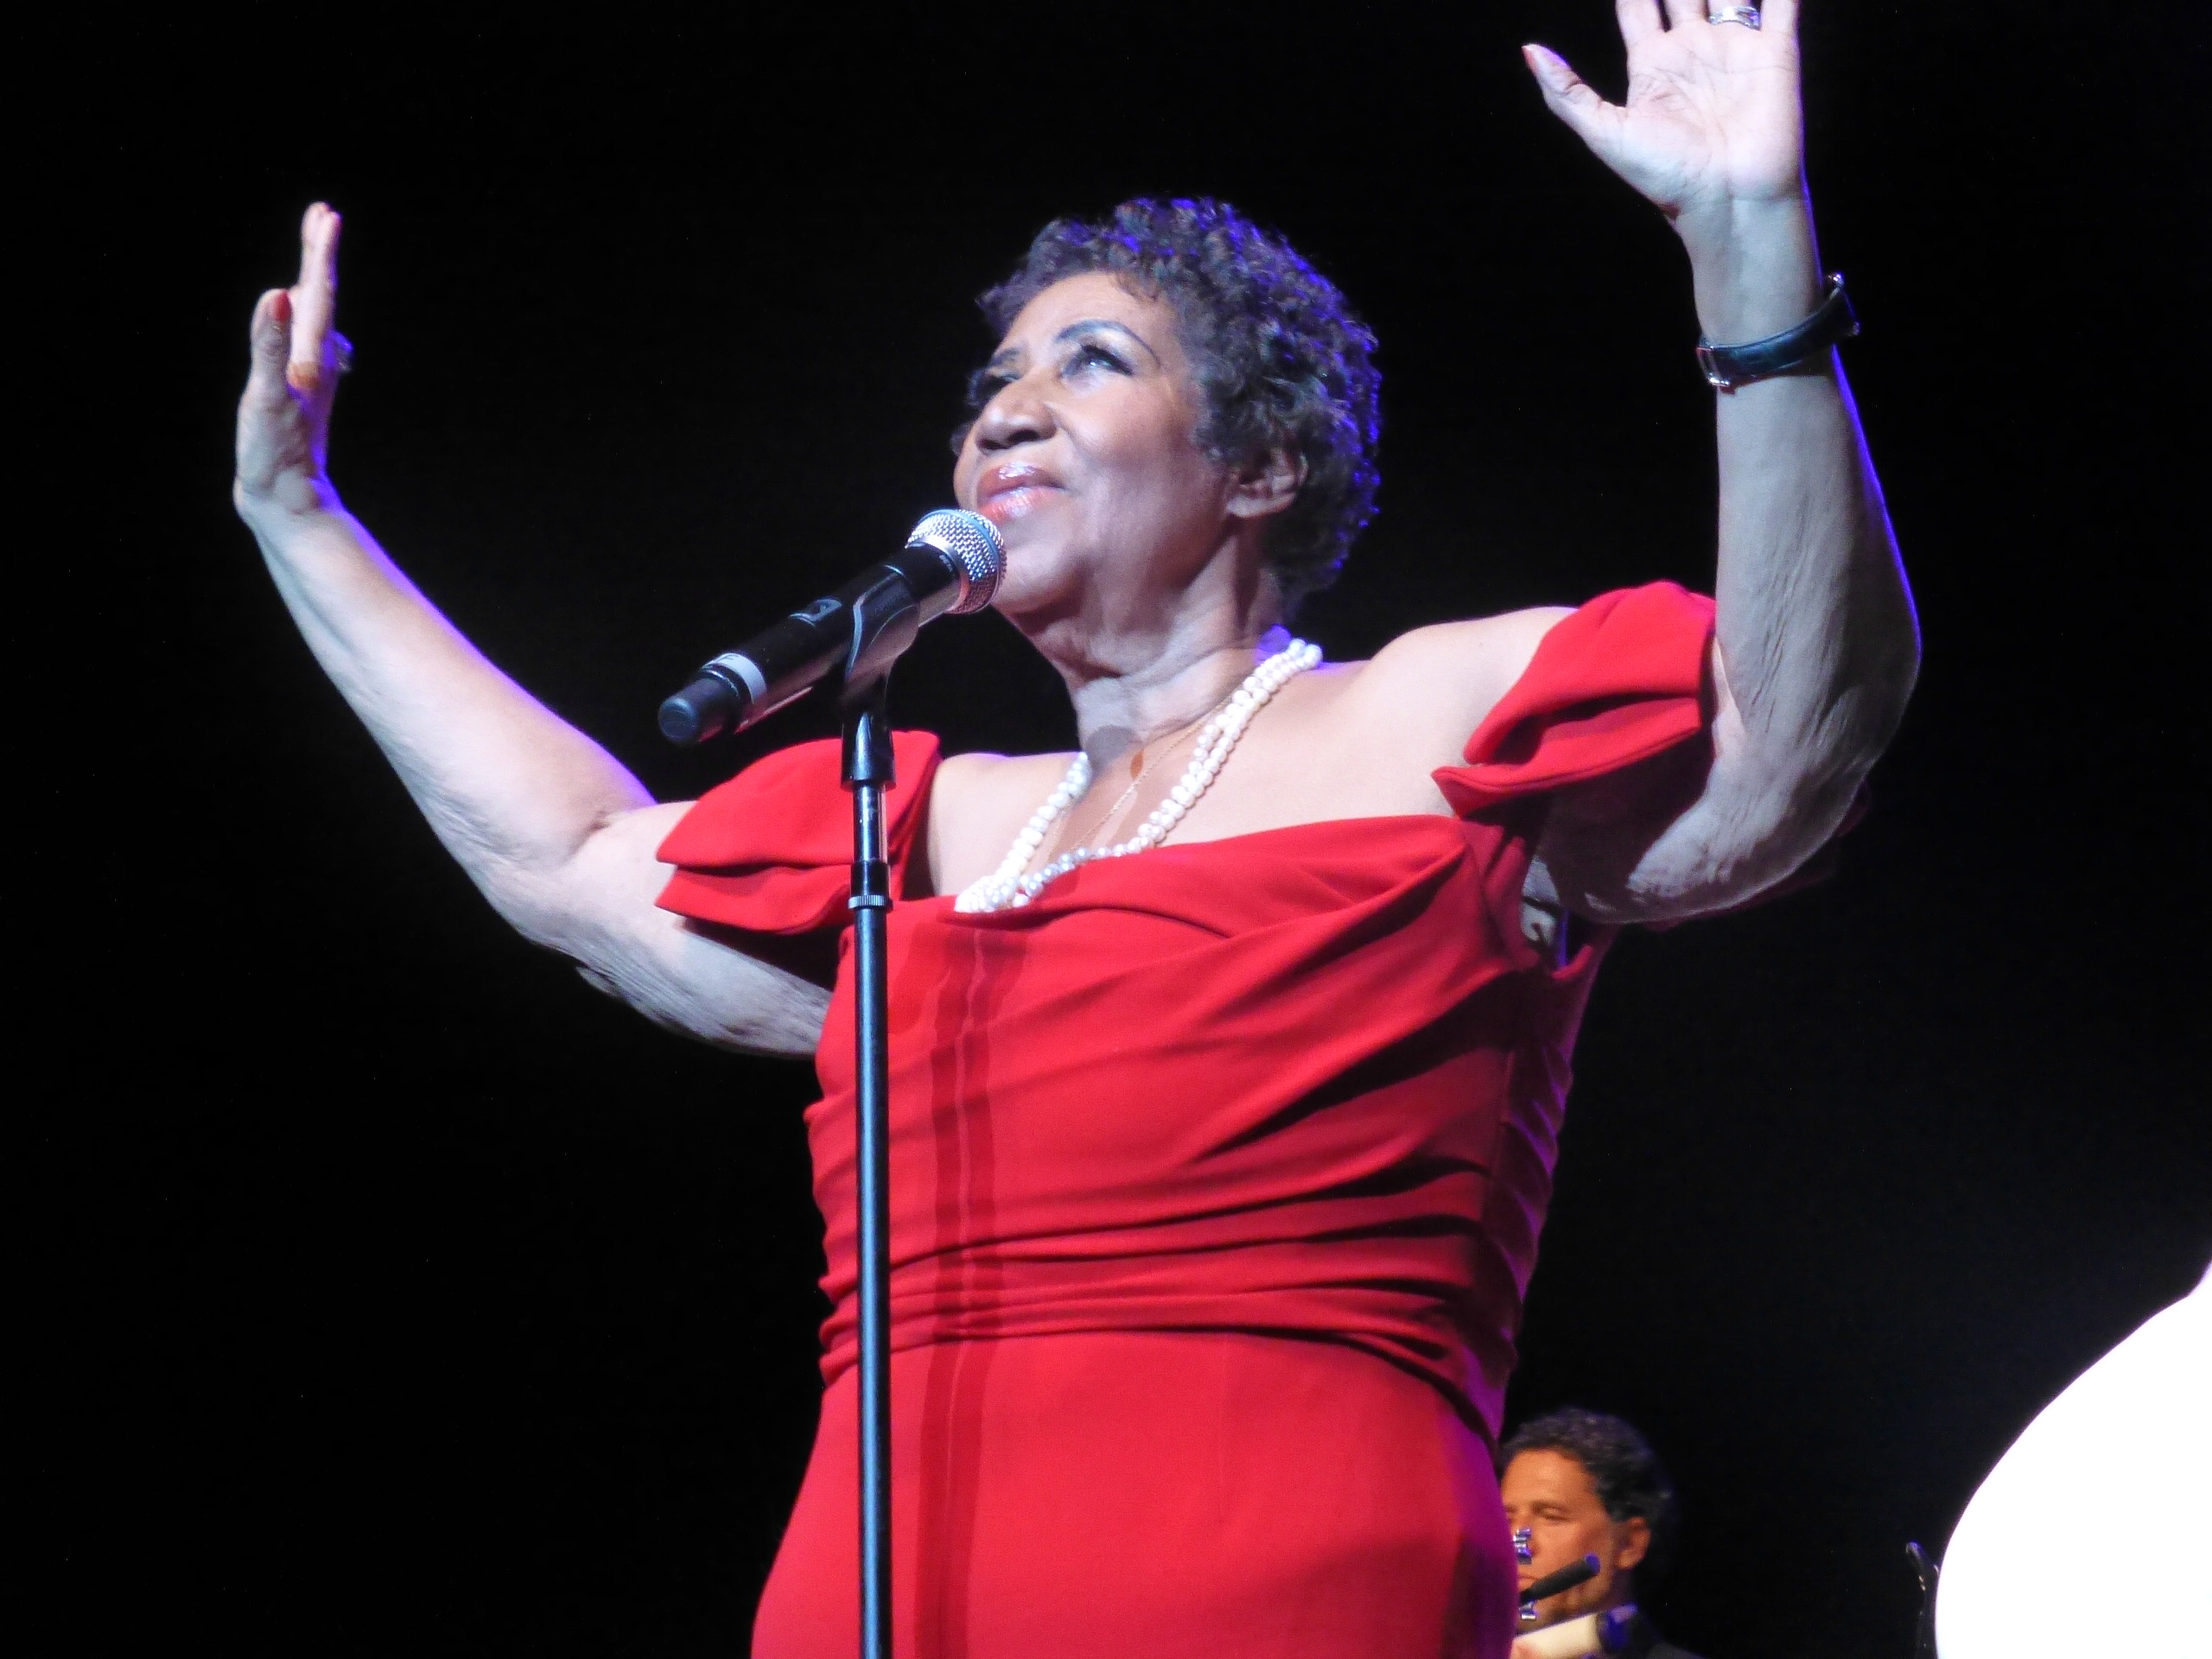 It's not Aretha Franklin's birthday until Wednesday, but she's been celebrating in style. Last night at the Ritz Carlton the Queen of Soul had the hottest ...